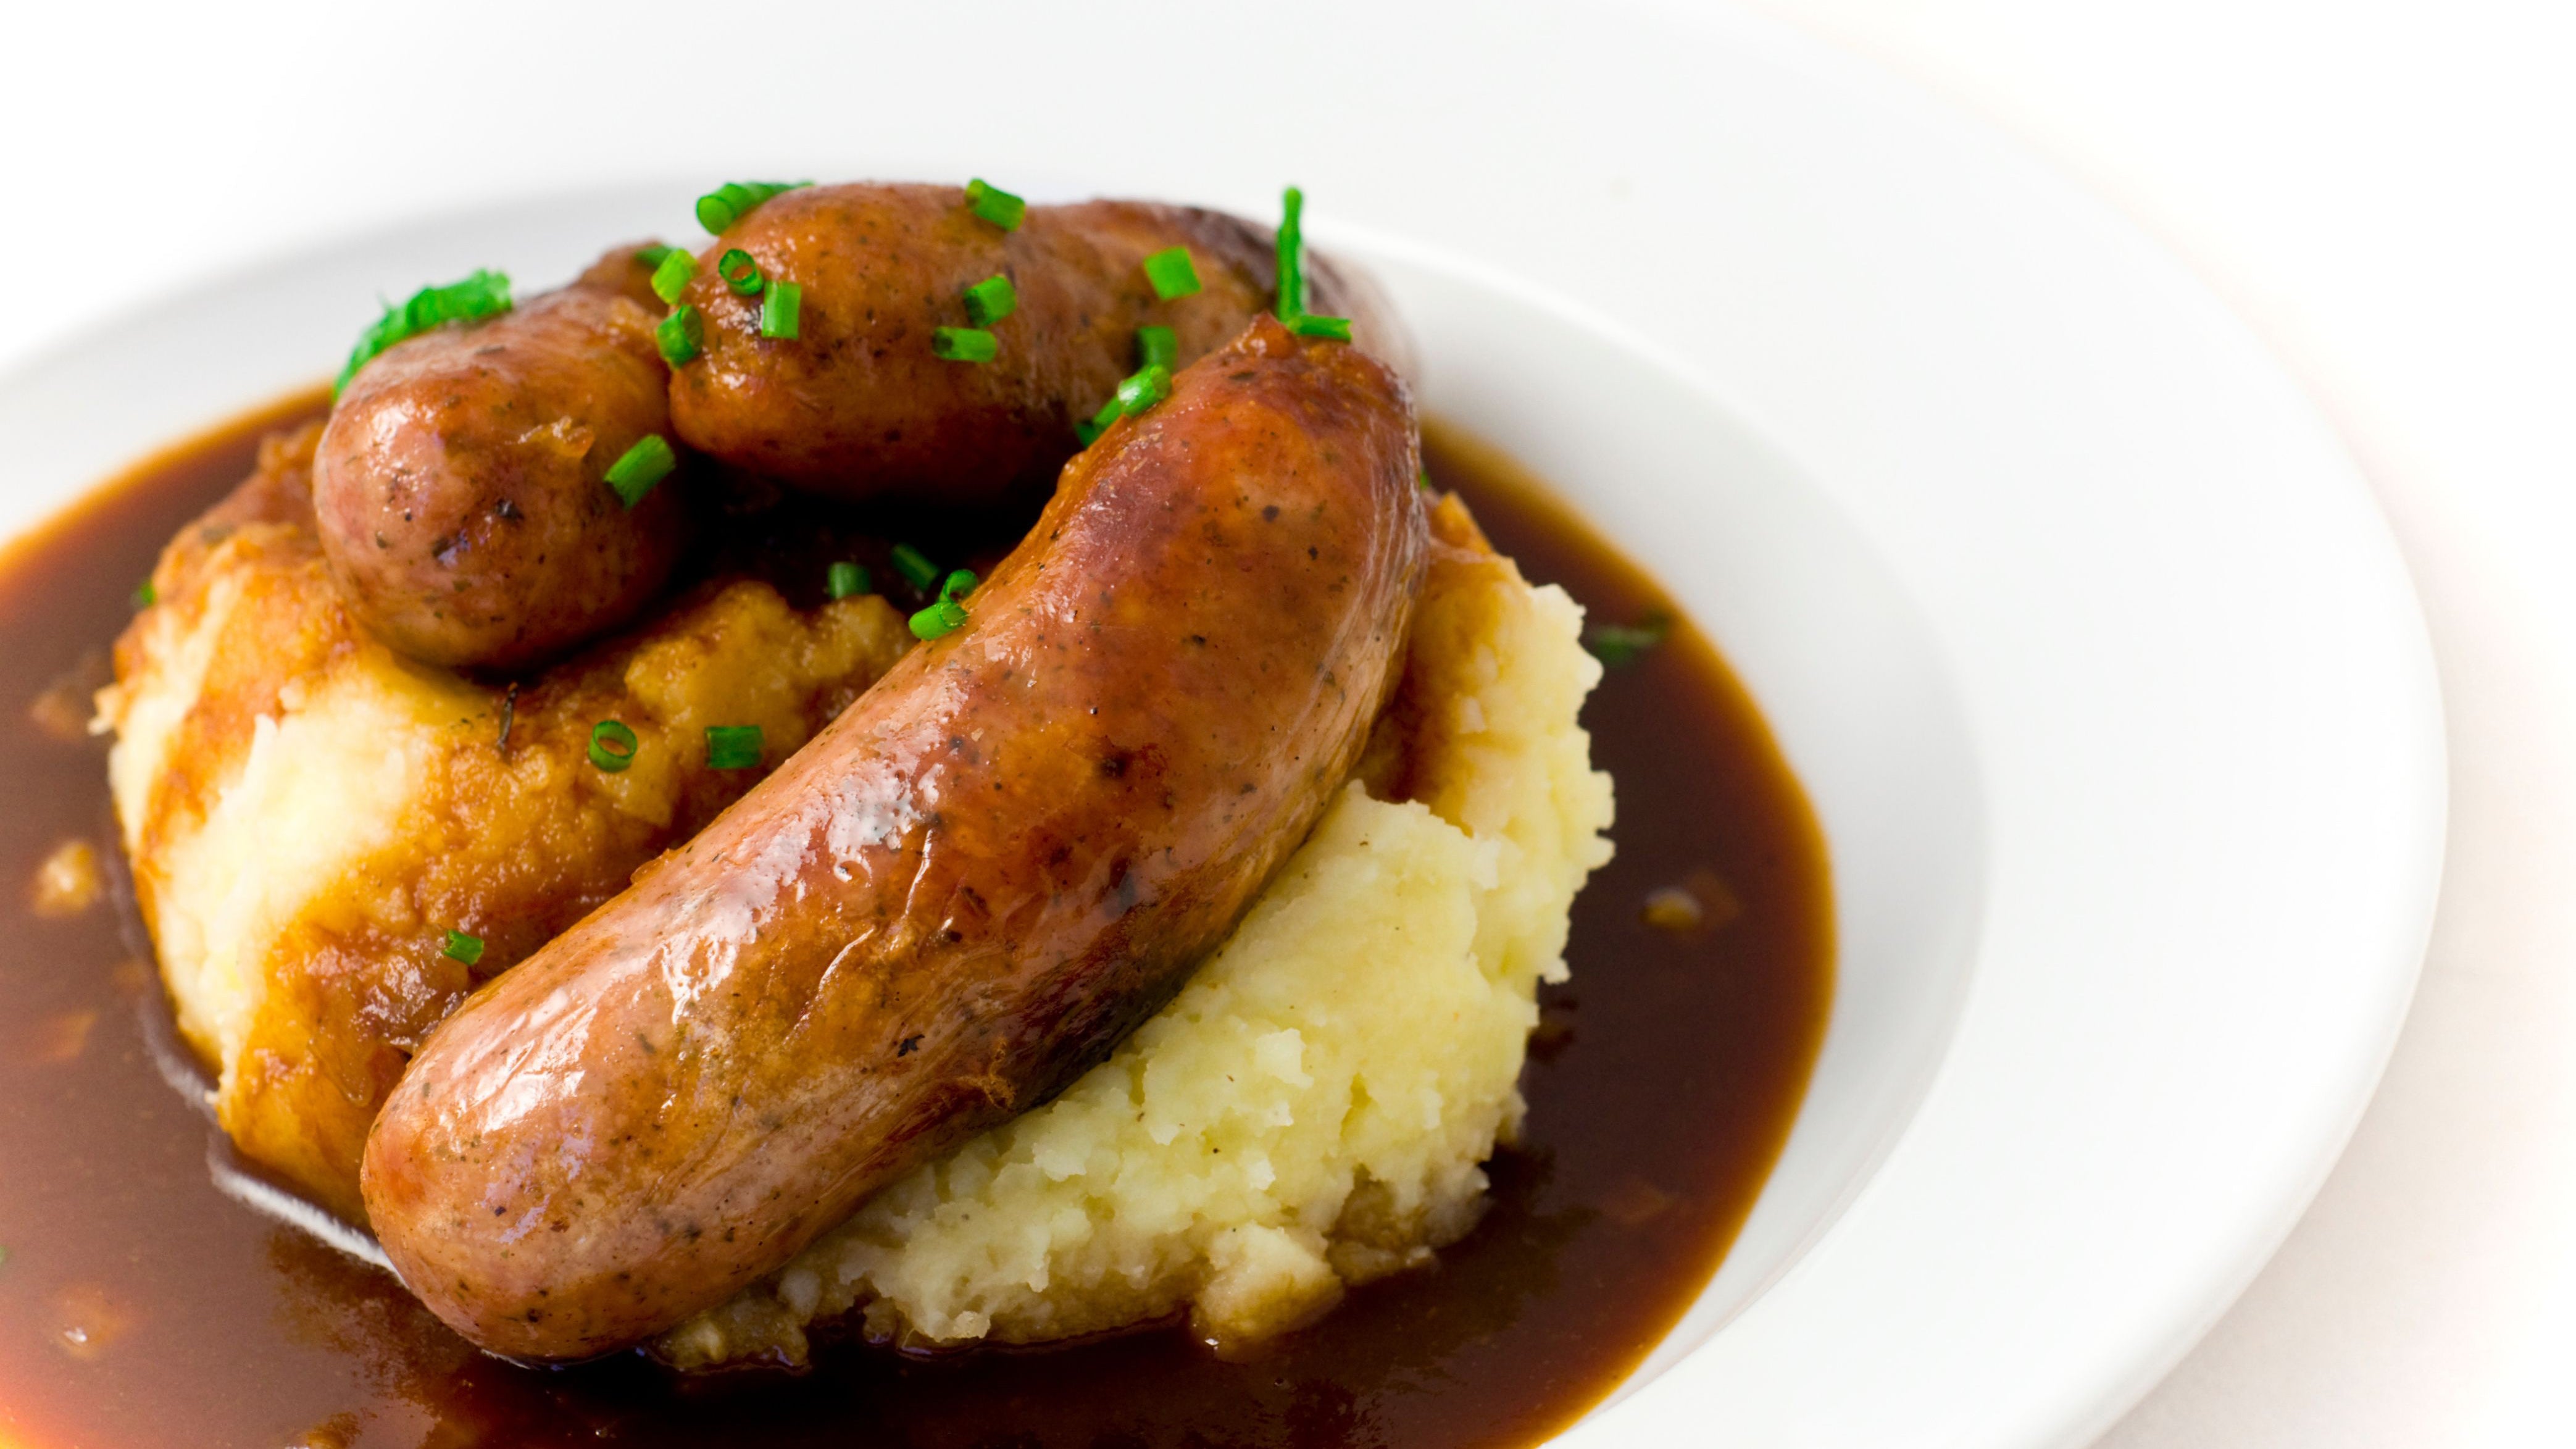 Wild Boar Sausage with Cranberries